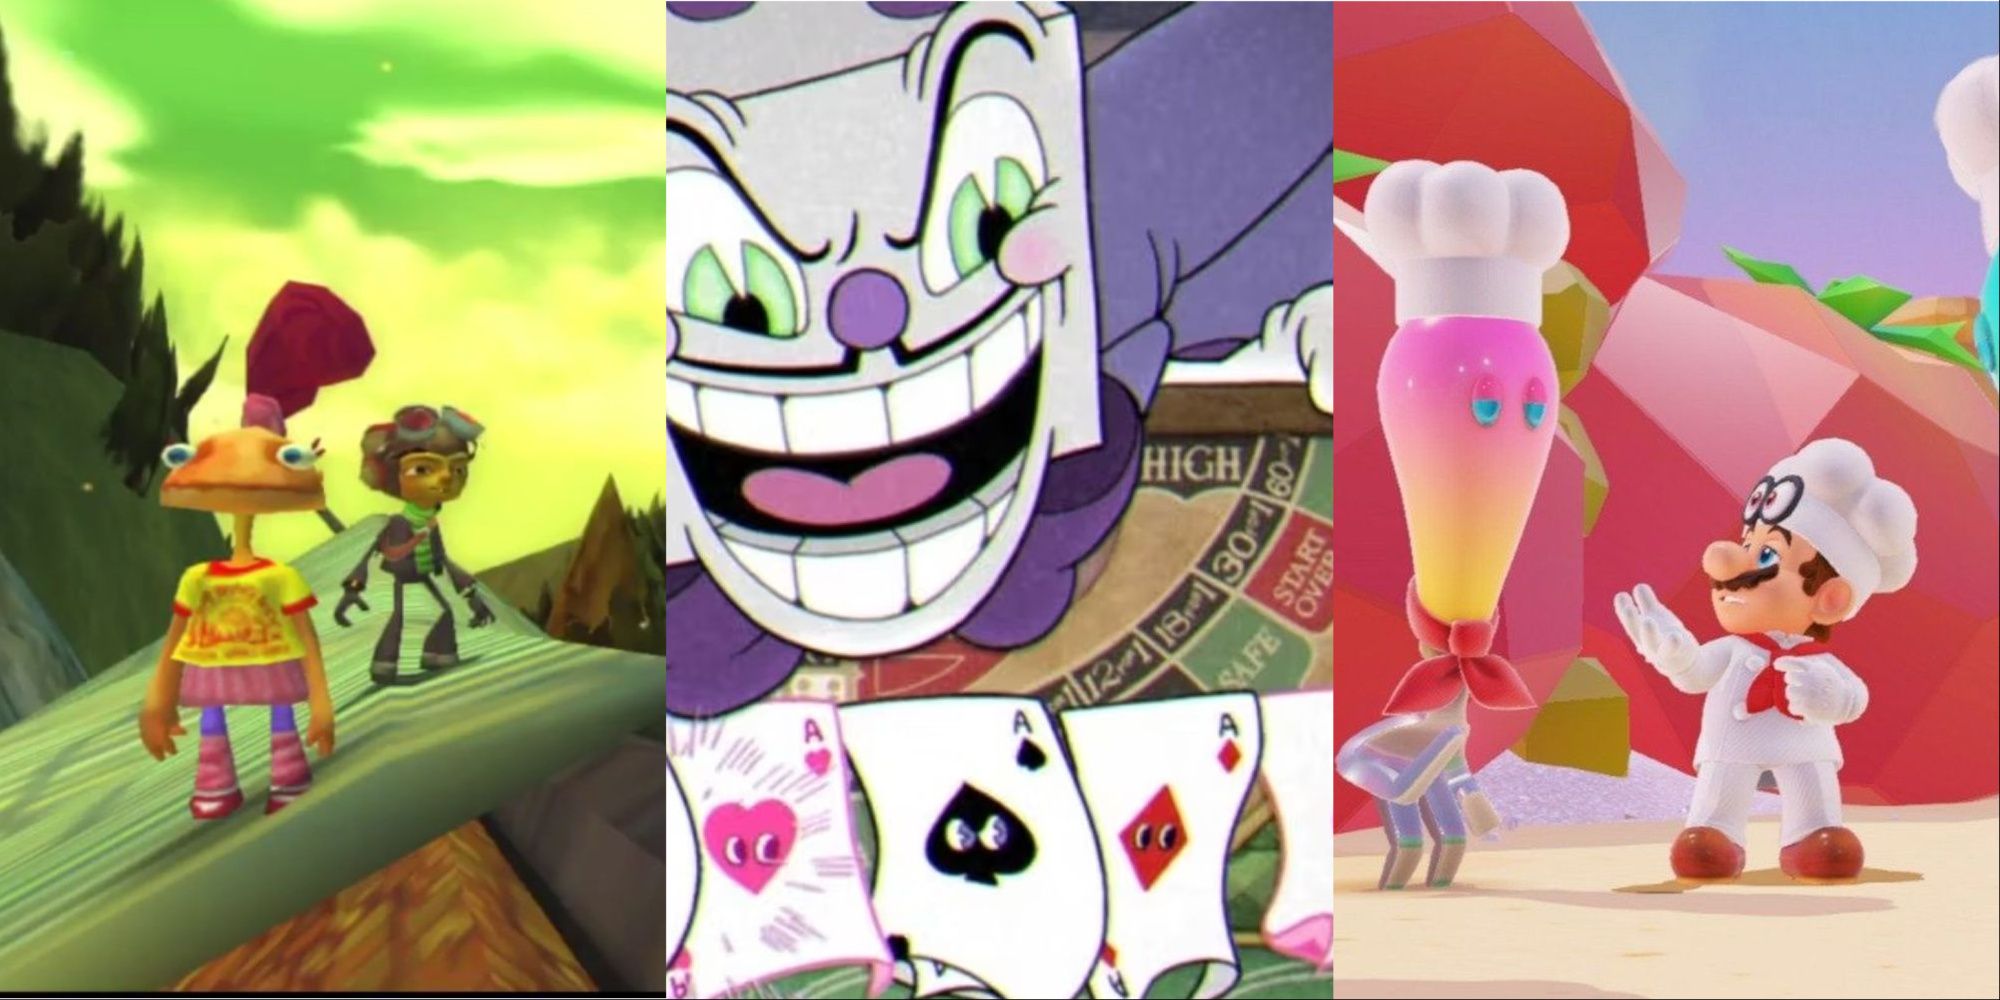 From left to right: Raz with an NPC from Psychonauts, King Dice from Cuphead, and Mario with some NPCs from Super Mario Odyssey